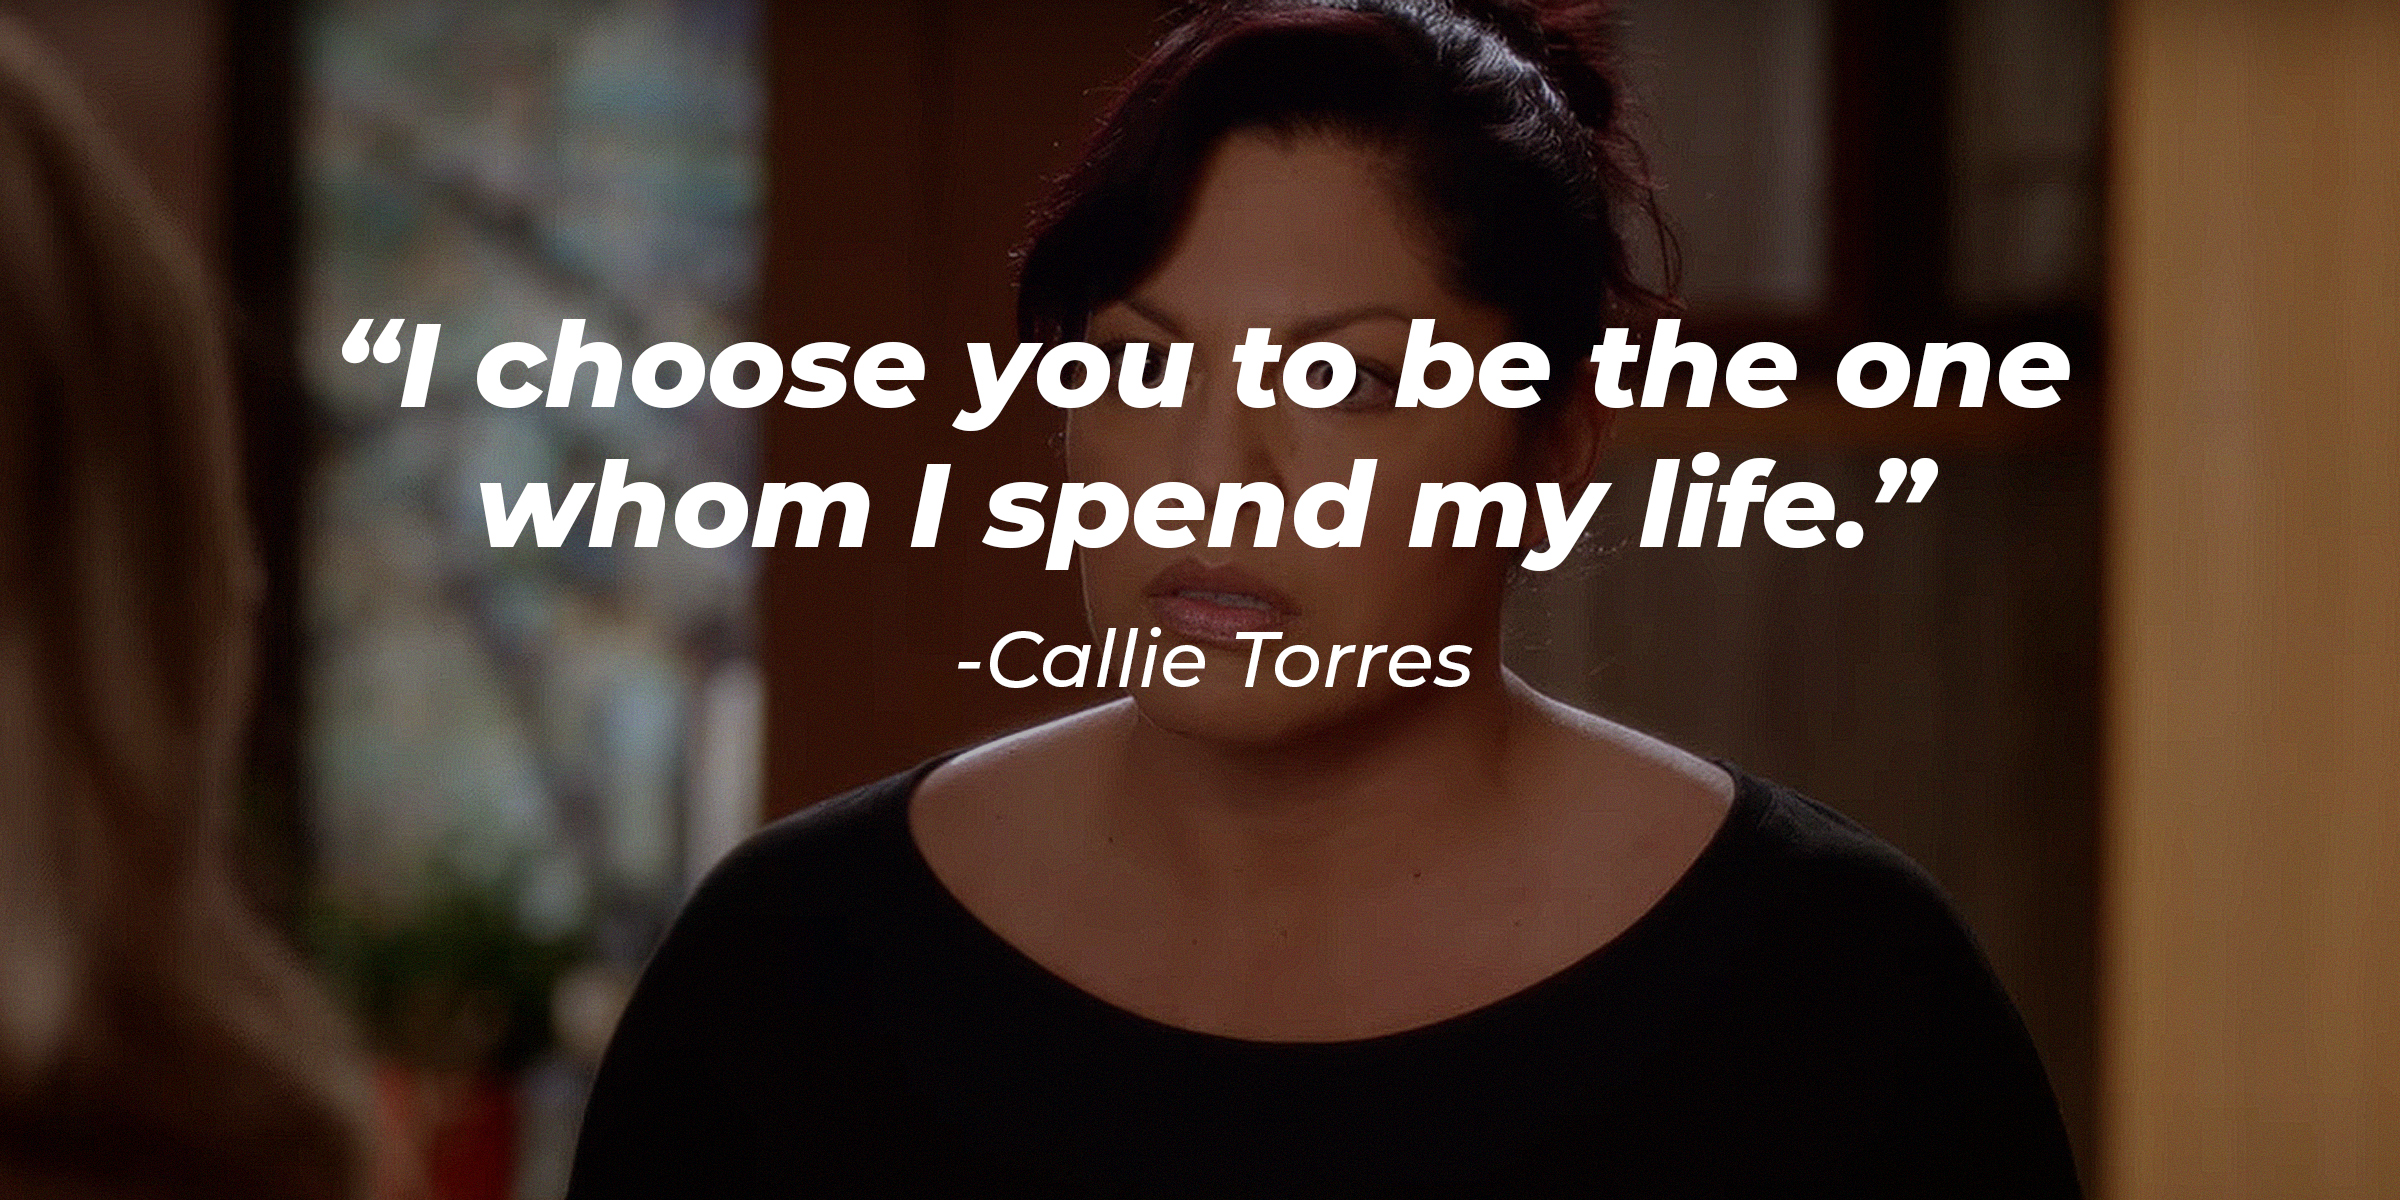 Callie Torres with her quote: "I choose you to be the one whom I spend my life." | Source: youtube.com/ABCNetwork